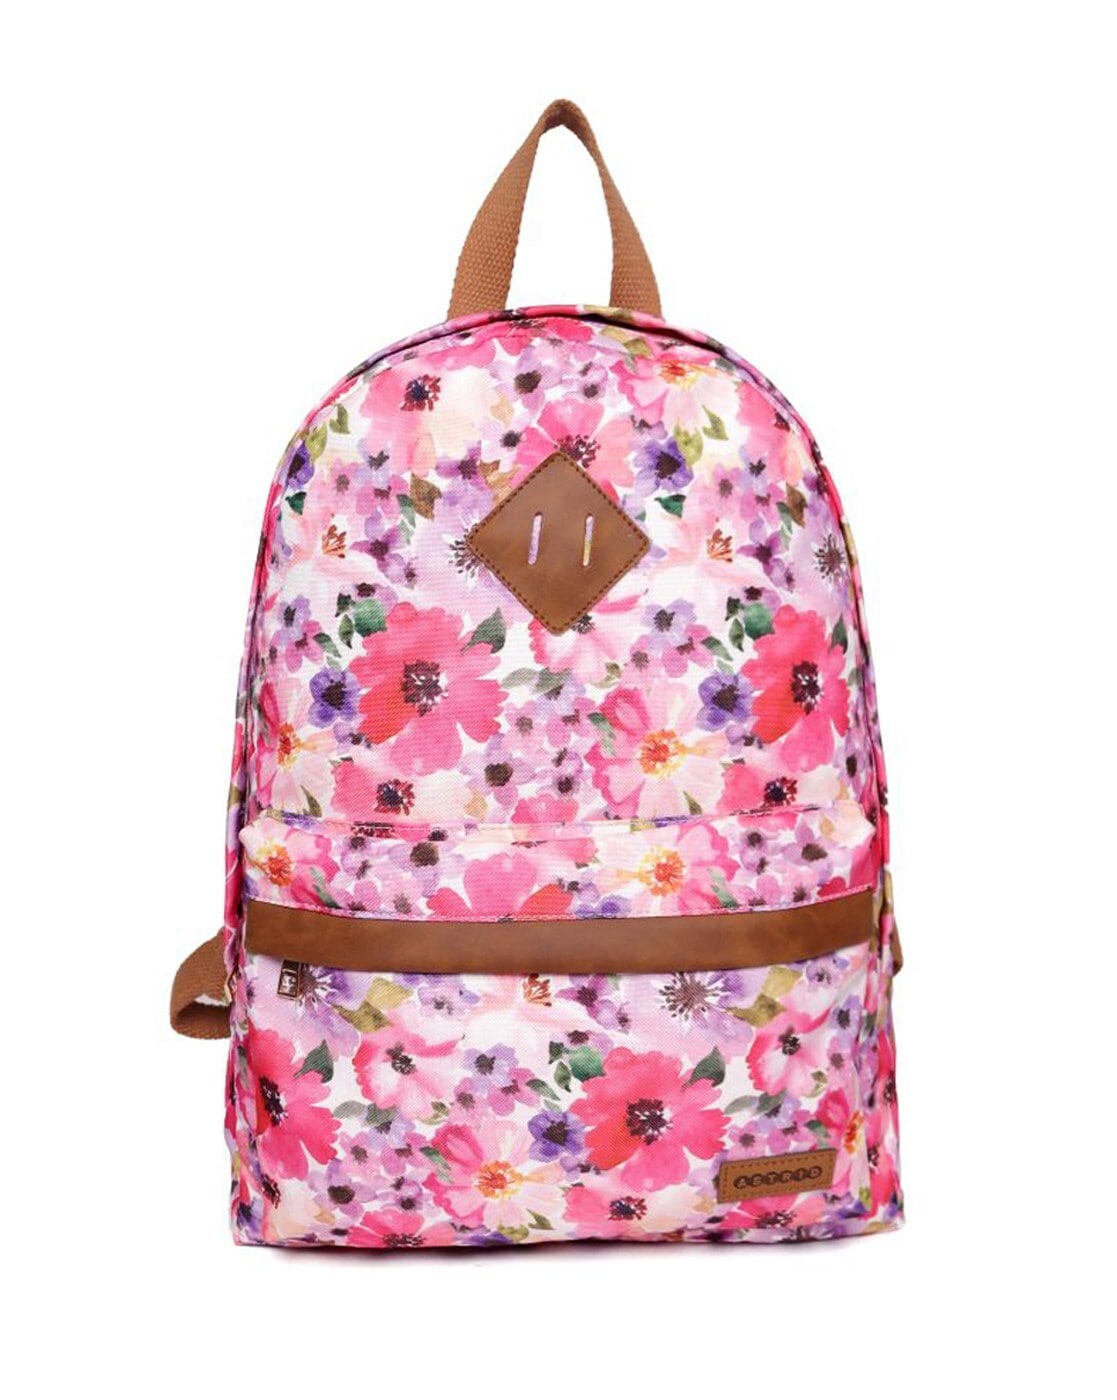 Backpack Purse, Floral Embroidery Vintage Faux Leather Backpack Purse —  Pesann.com